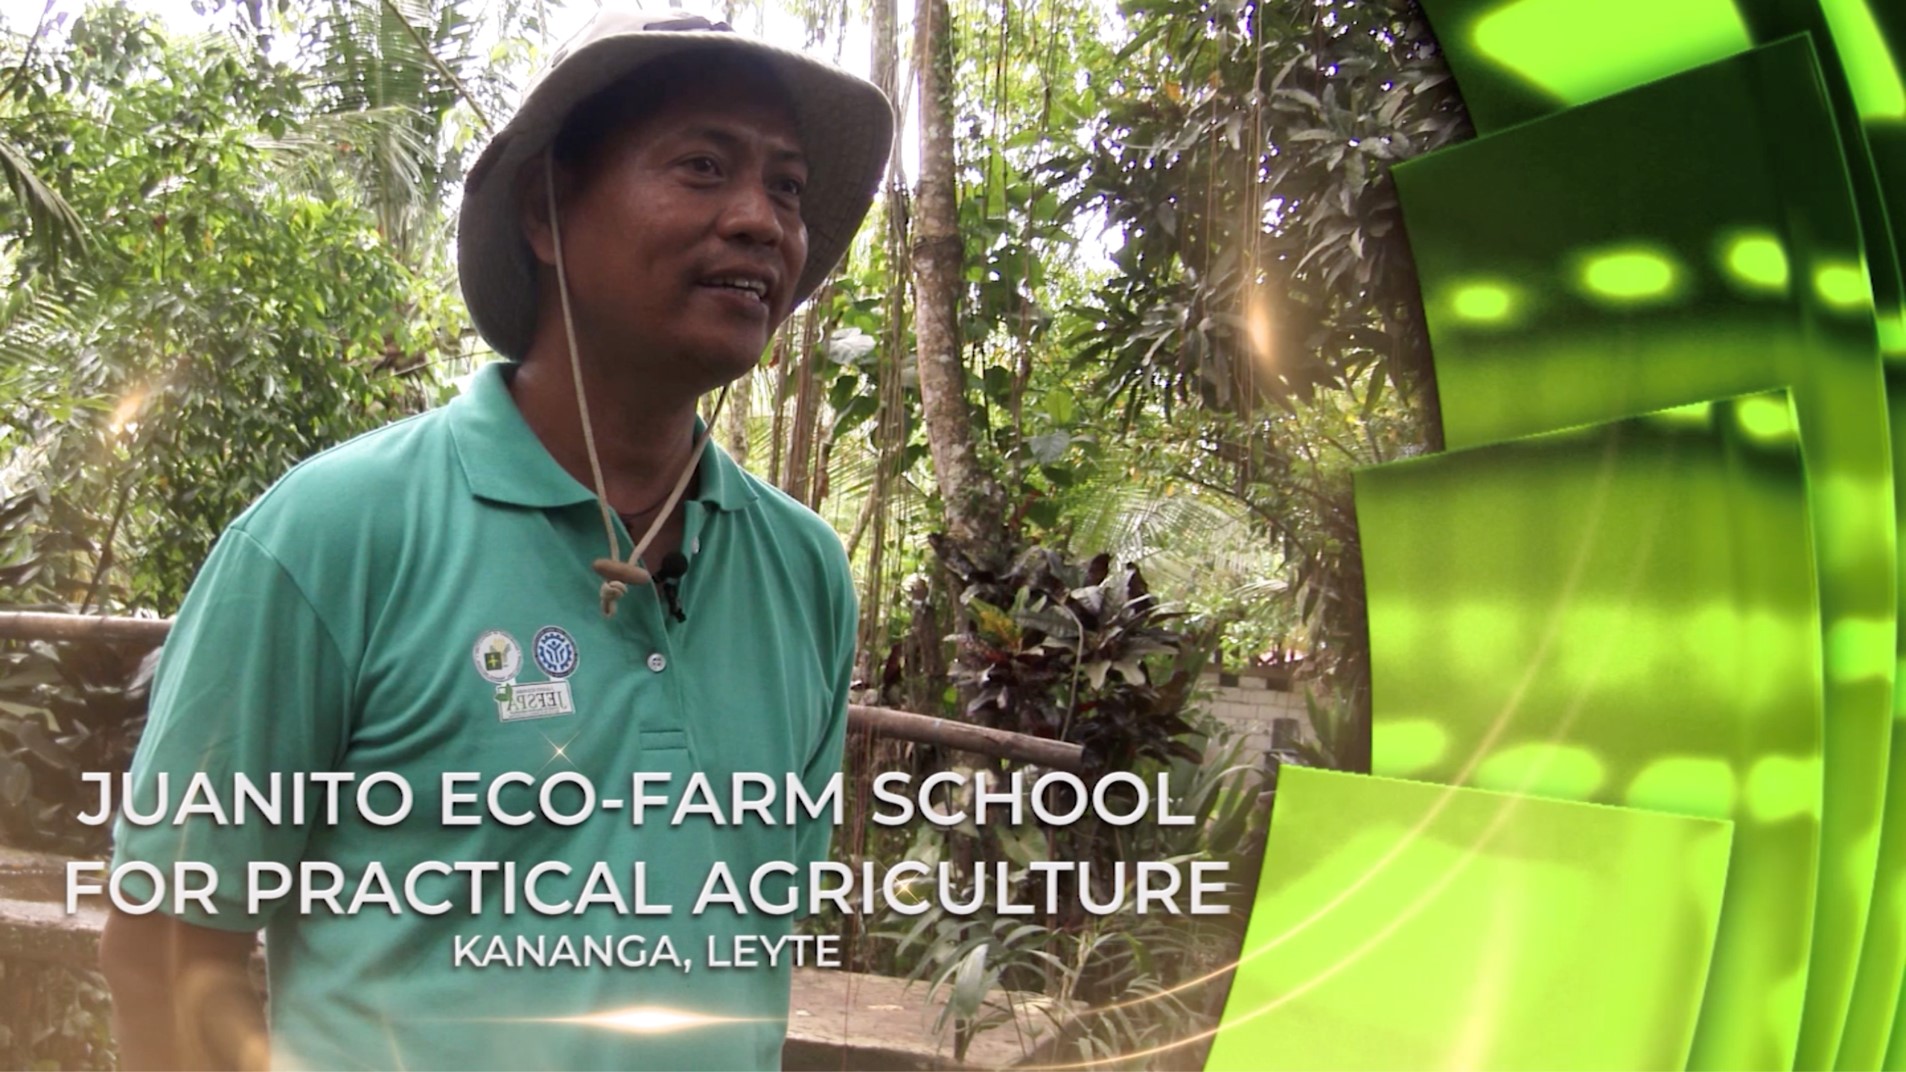 Juanito Eco-Farm School for Practical Agriculture